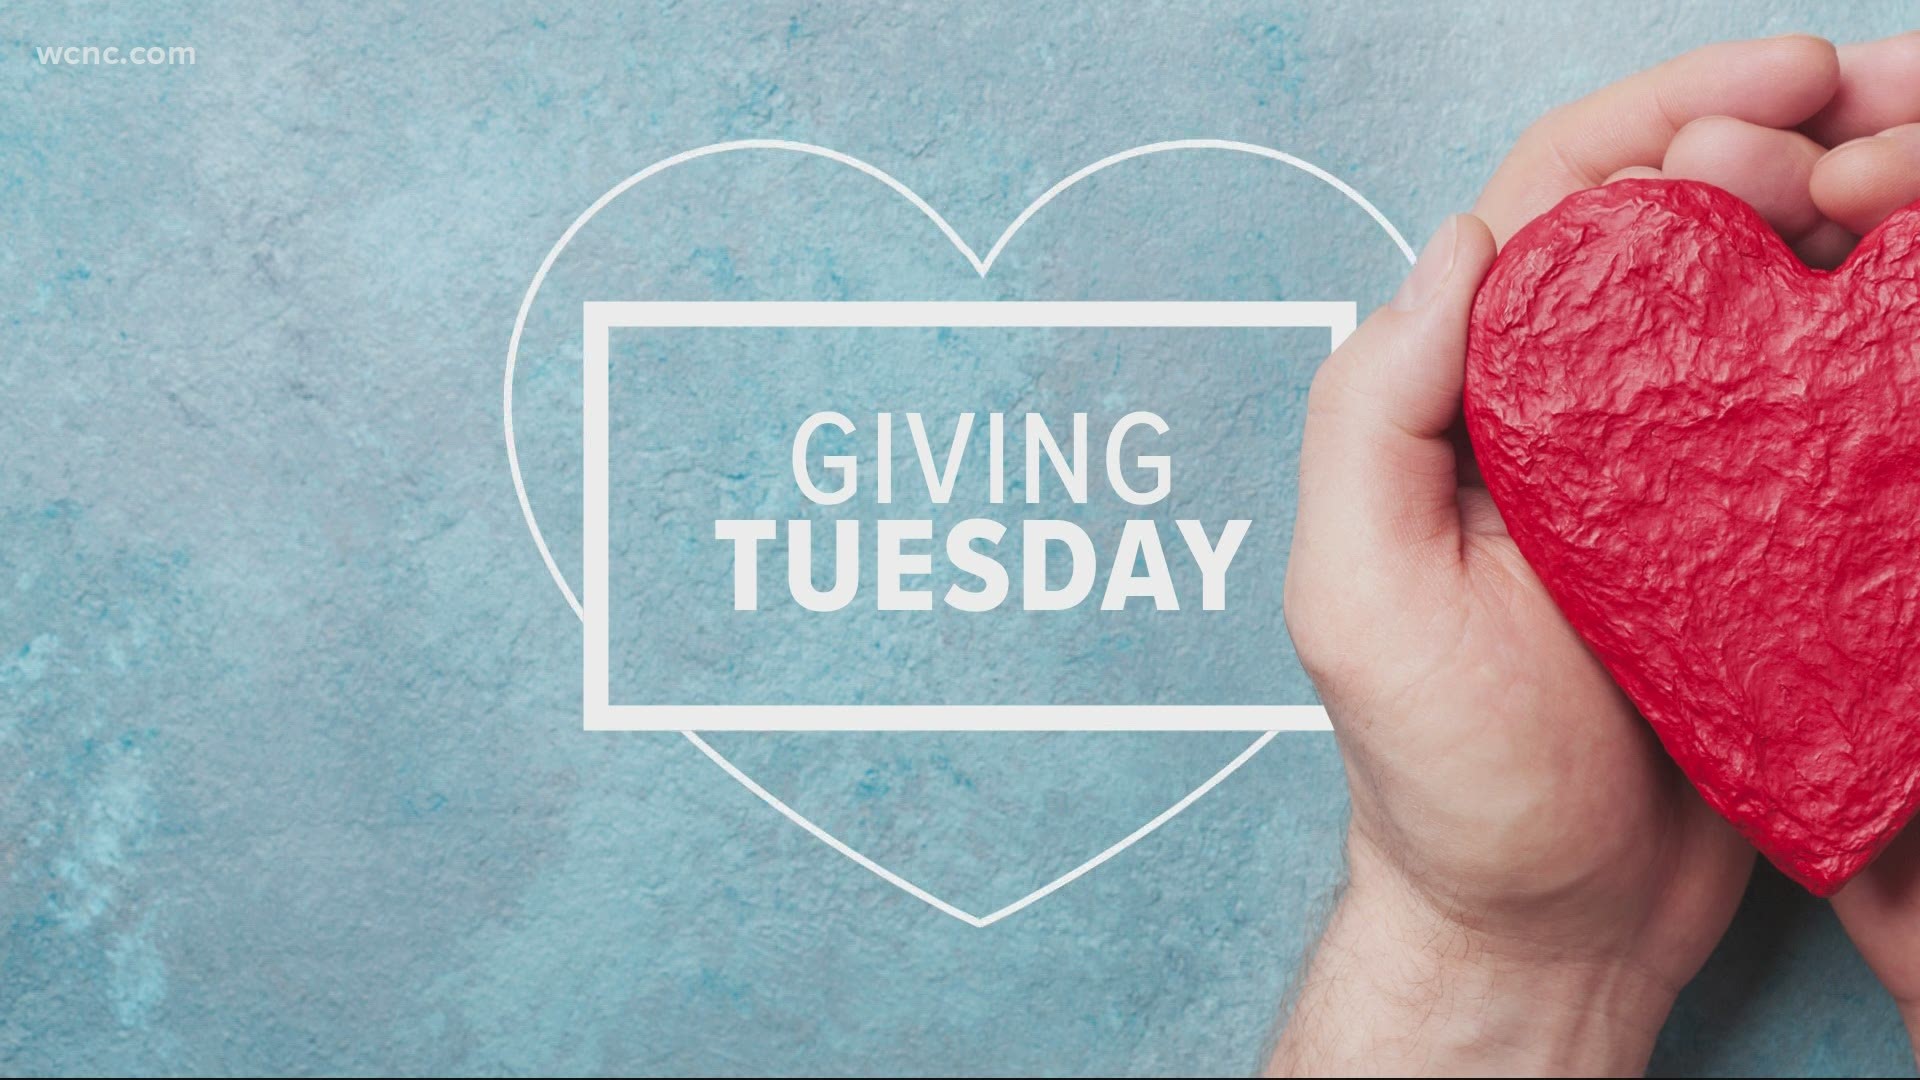 Giving Tuesday is a time to give back during the holidays. Here's how you can make your charitable contribution work for you.